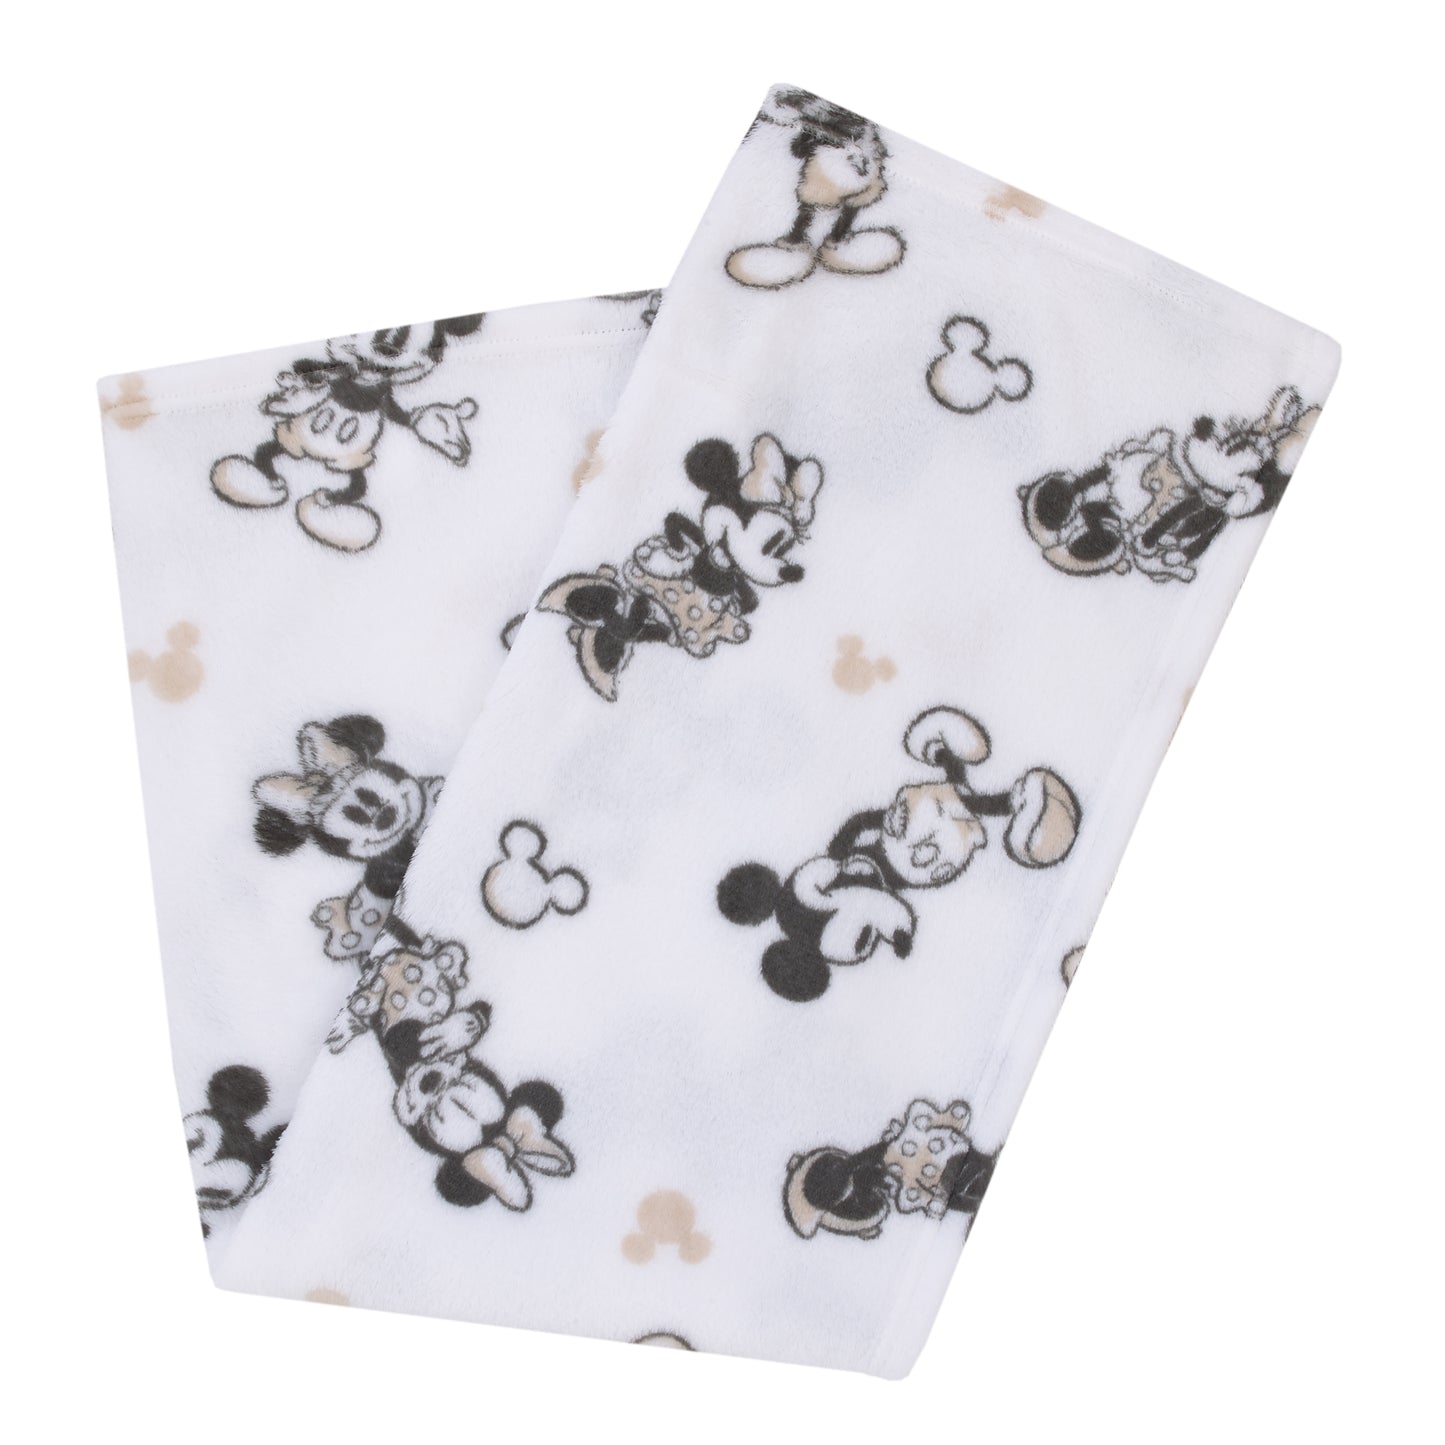 Disney Mickey and Minnie Mouse Black and White Super Soft Baby Blanket